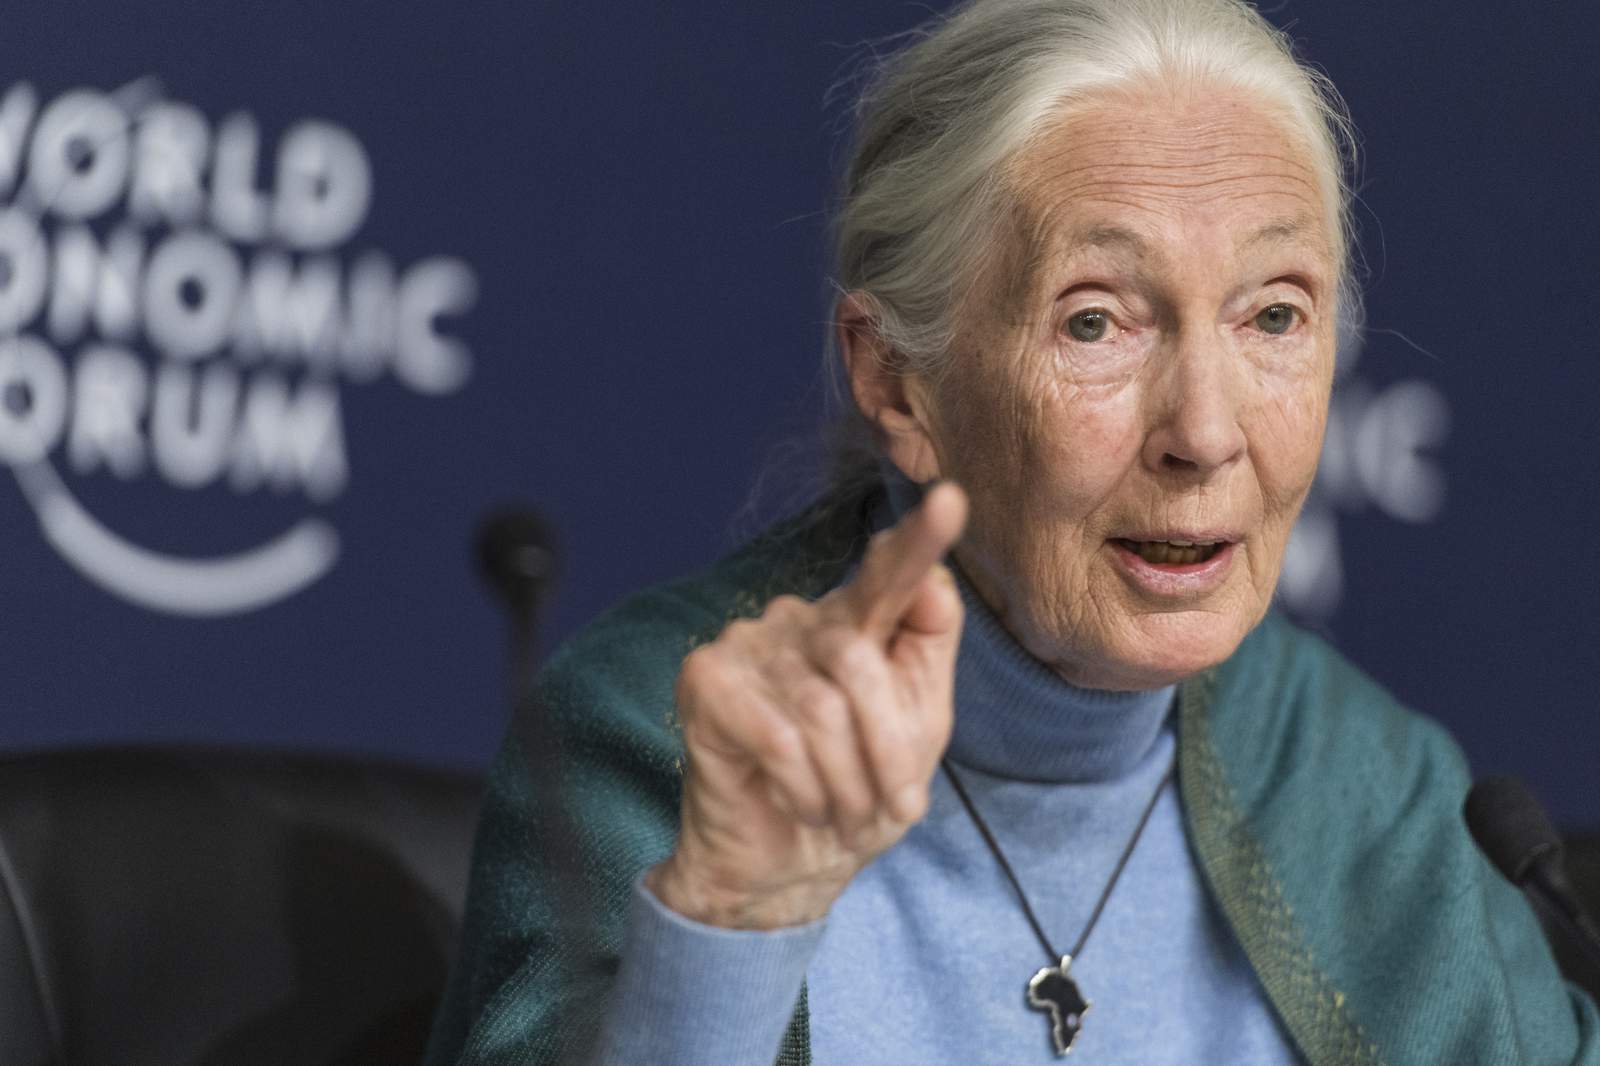 Jane Goodall's 'The Book of Hope' coming out in 2021